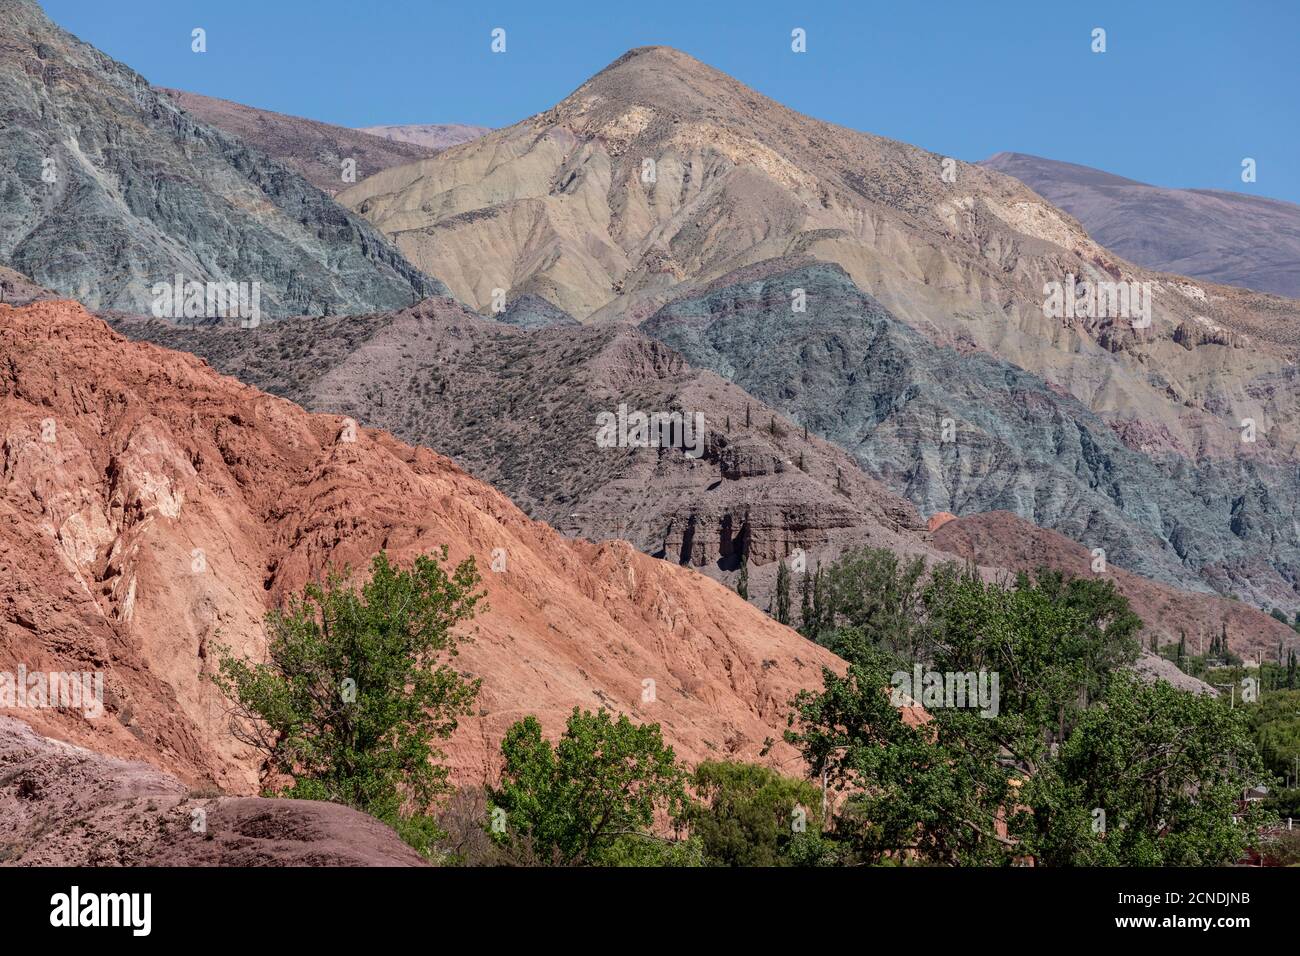 The village of Purmamarca, at the base of Seven Colors Hill, Jujuy province of northwest Argentina Stock Photo